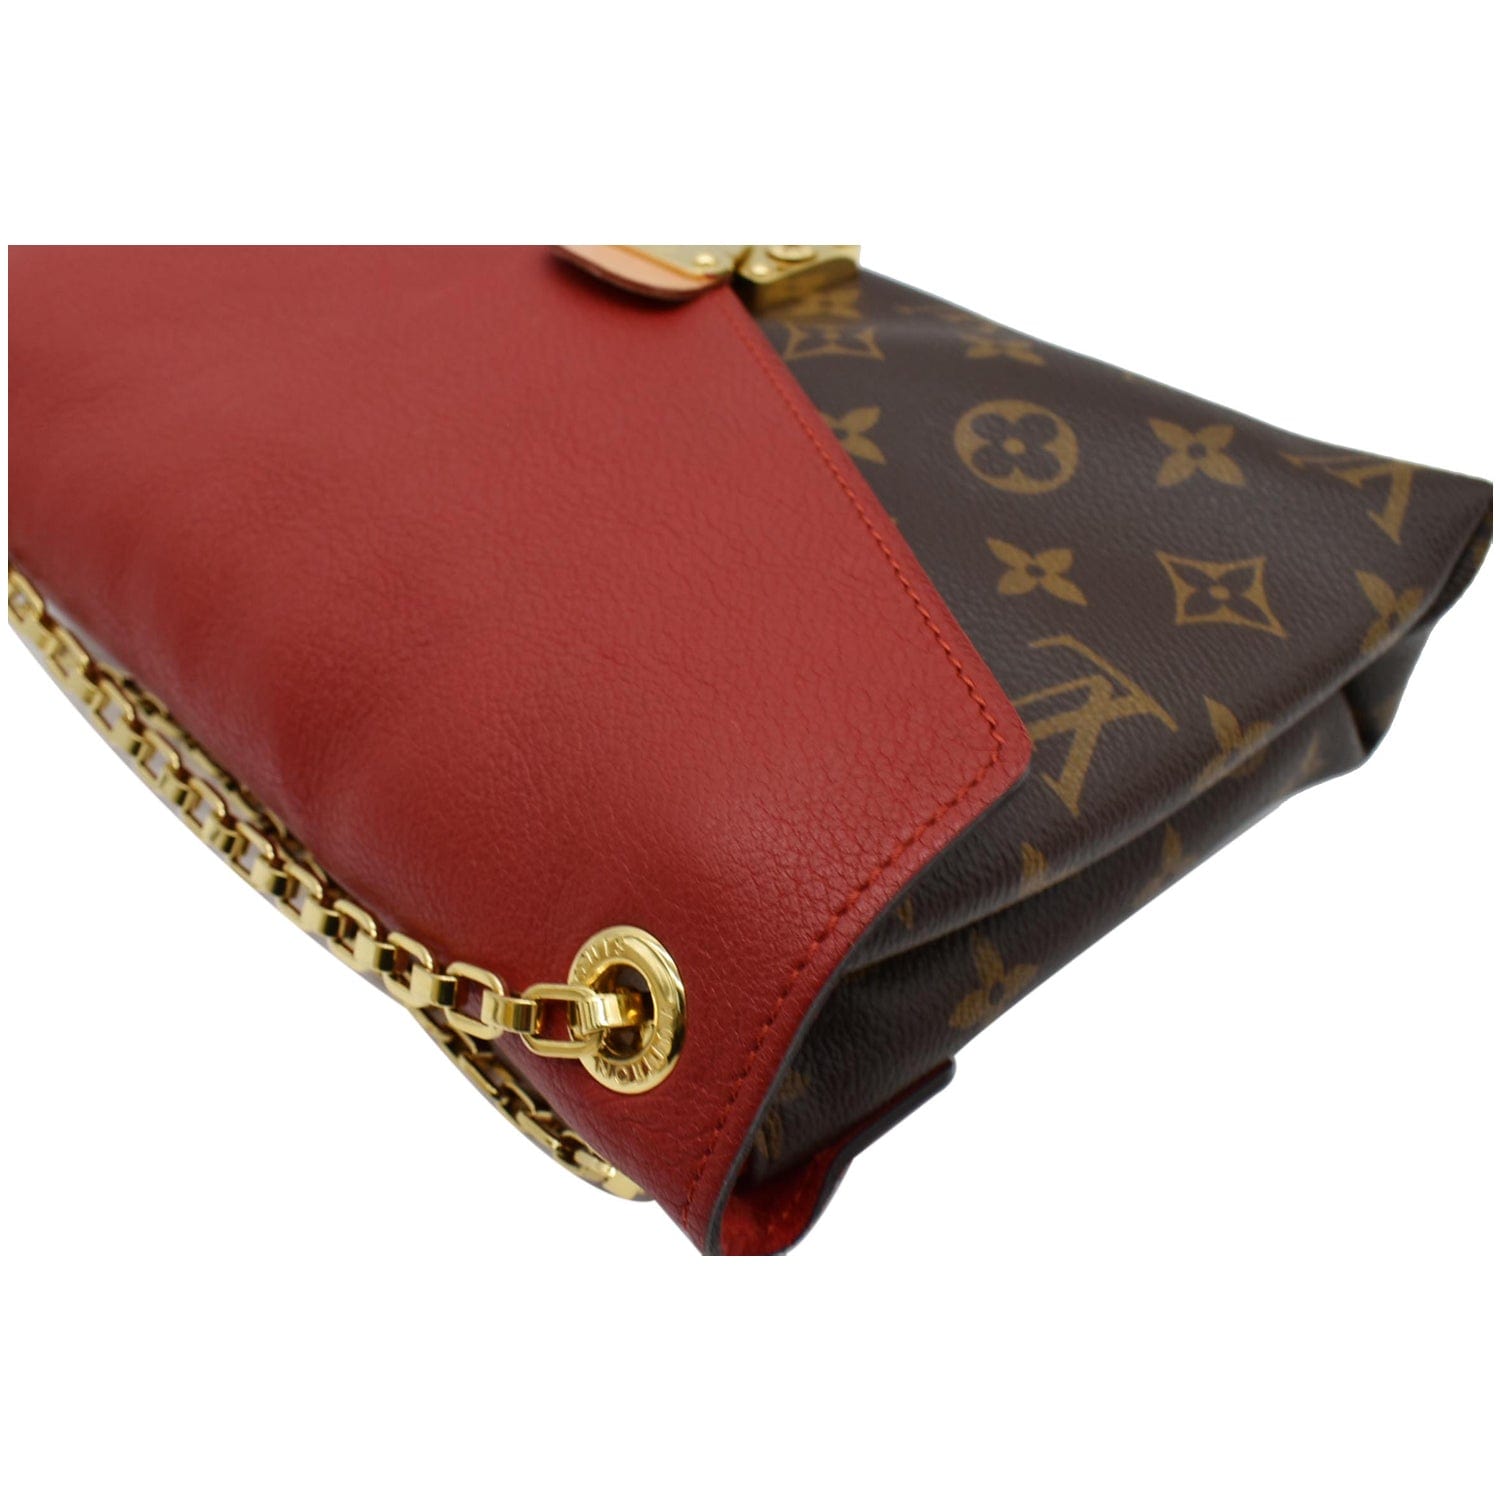 Louis Vuitton - Authenticated Pallas Clutch Bag - Leather Pink Plain For Woman, Never Worn